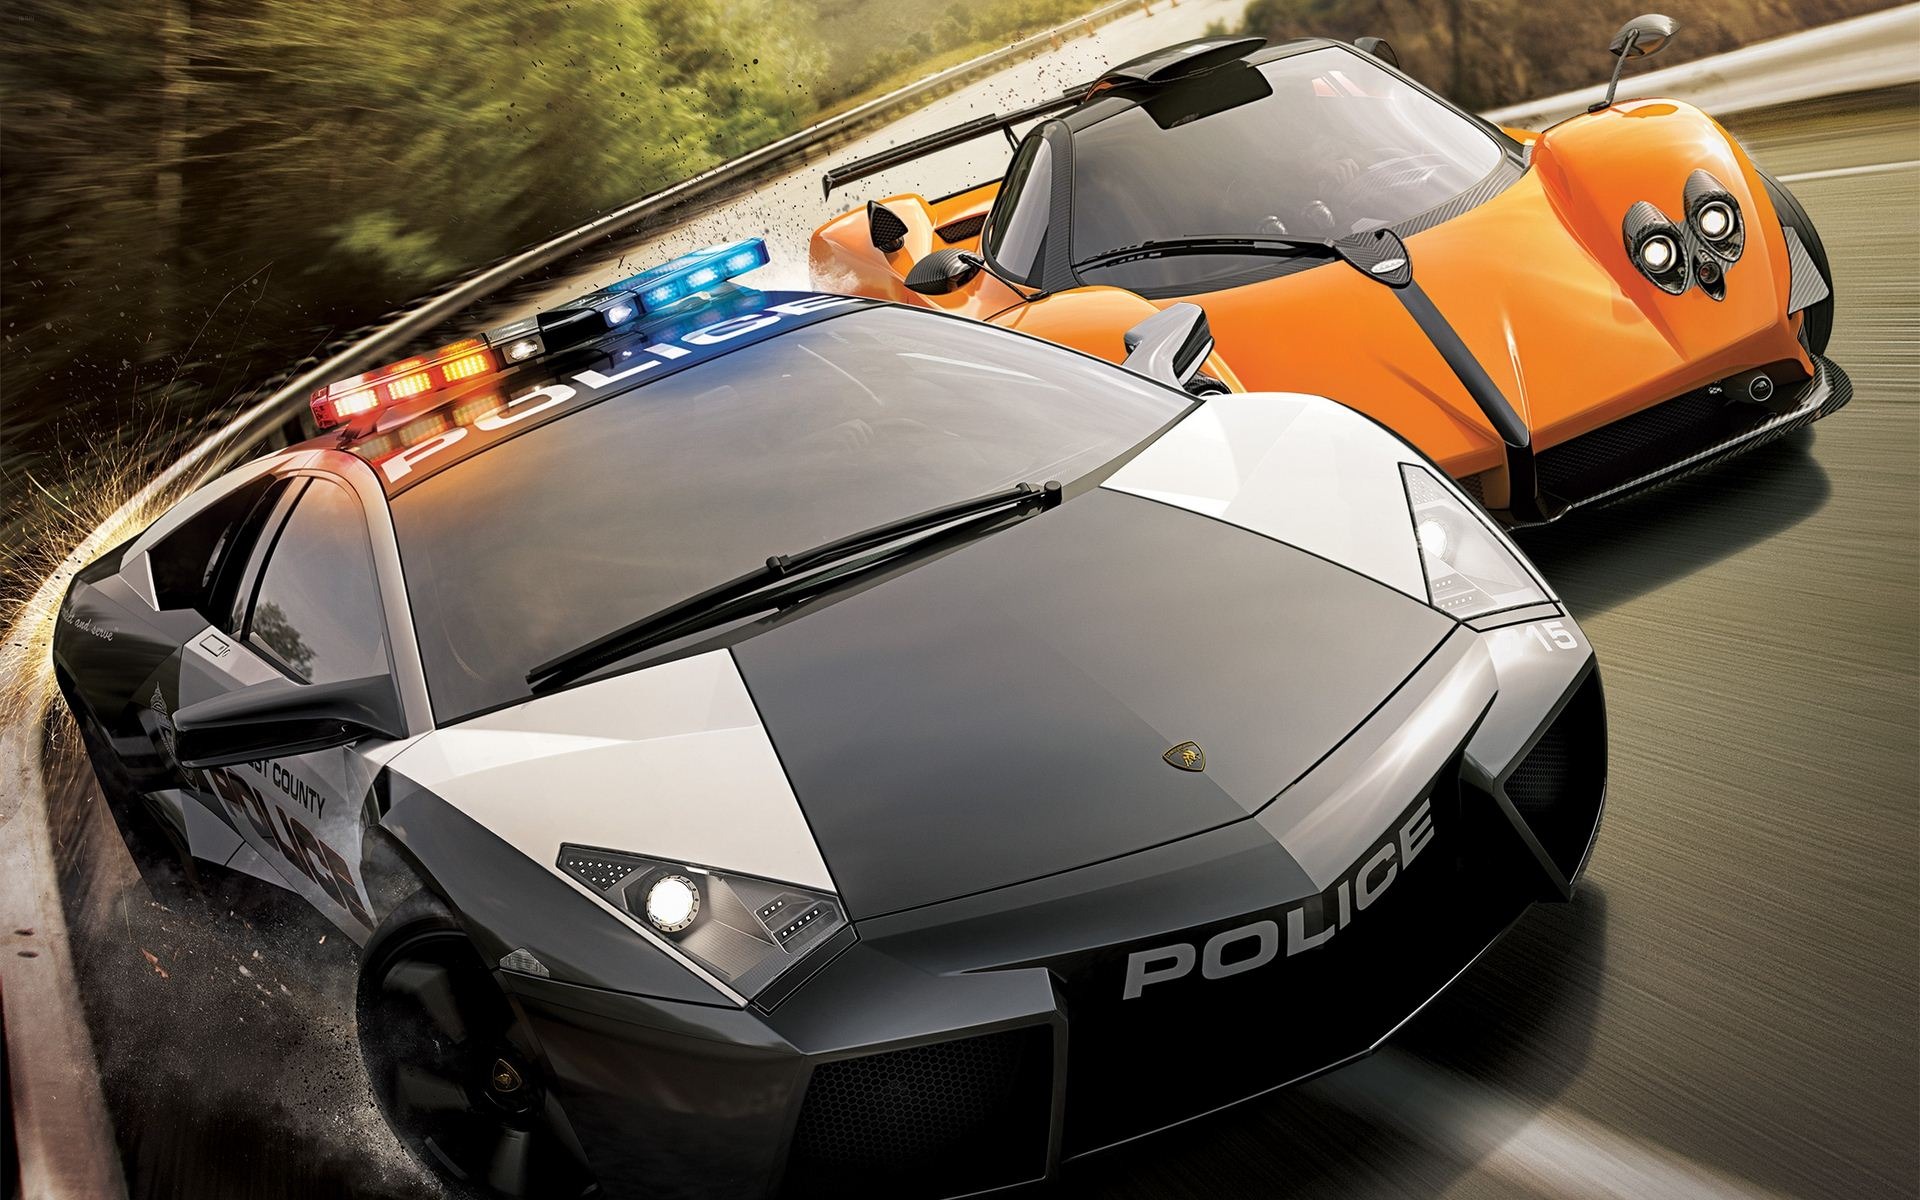 Need for Speed: Hot Pursuit 极品飞车14：热力追踪3 - 1920x1200